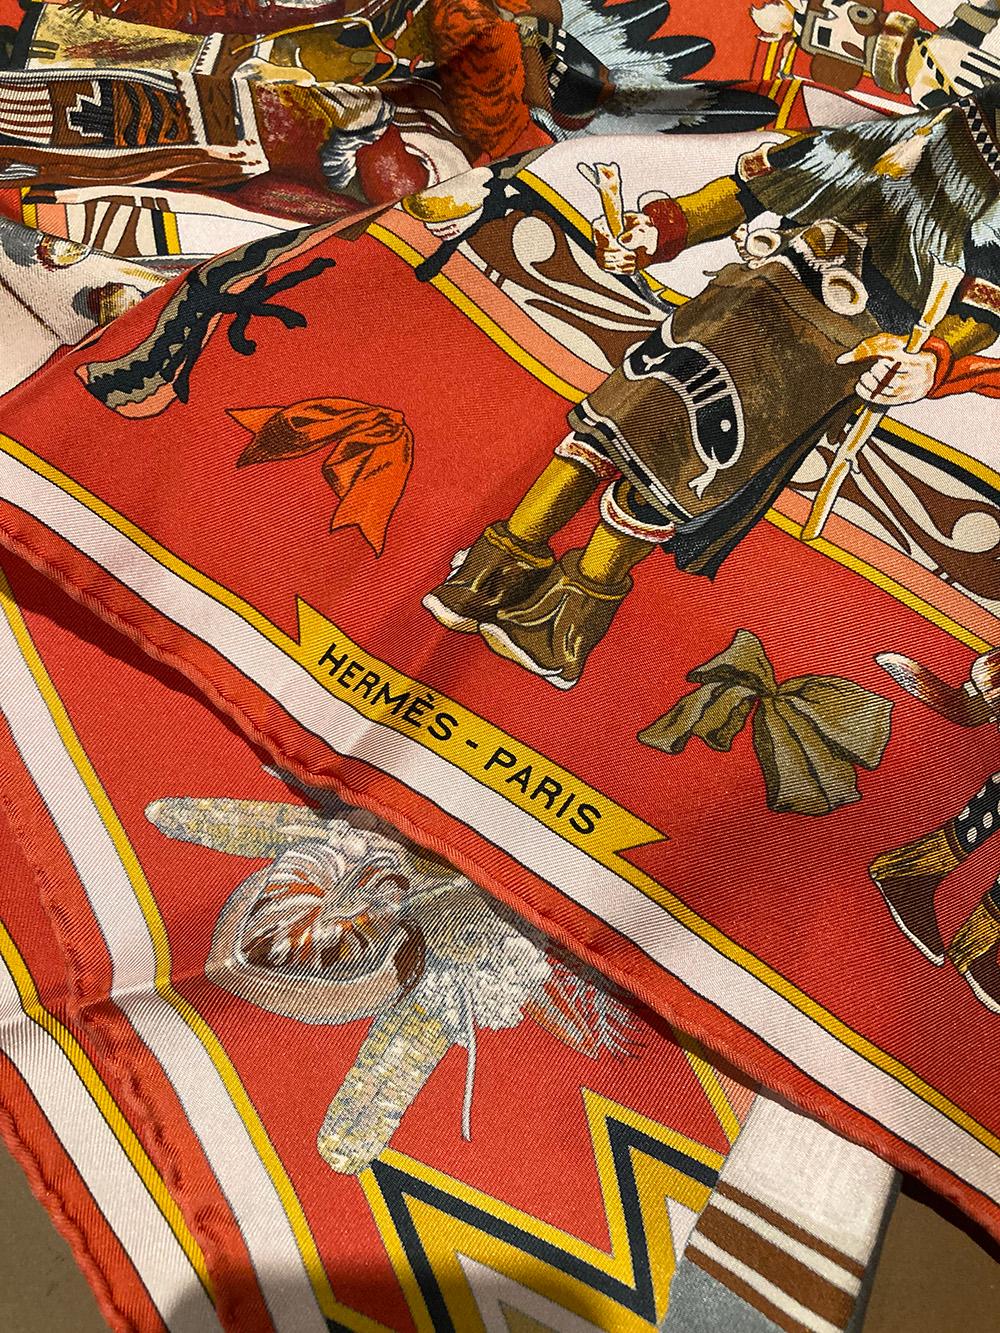 RARE Hermes Vintage Kachinas Silk Scarf in excellent condition. Original silk screen design c1992 by Kermit Oliver features various multicolor native american chiefs and people in traditional dress over a multi tonal coral background with coral,